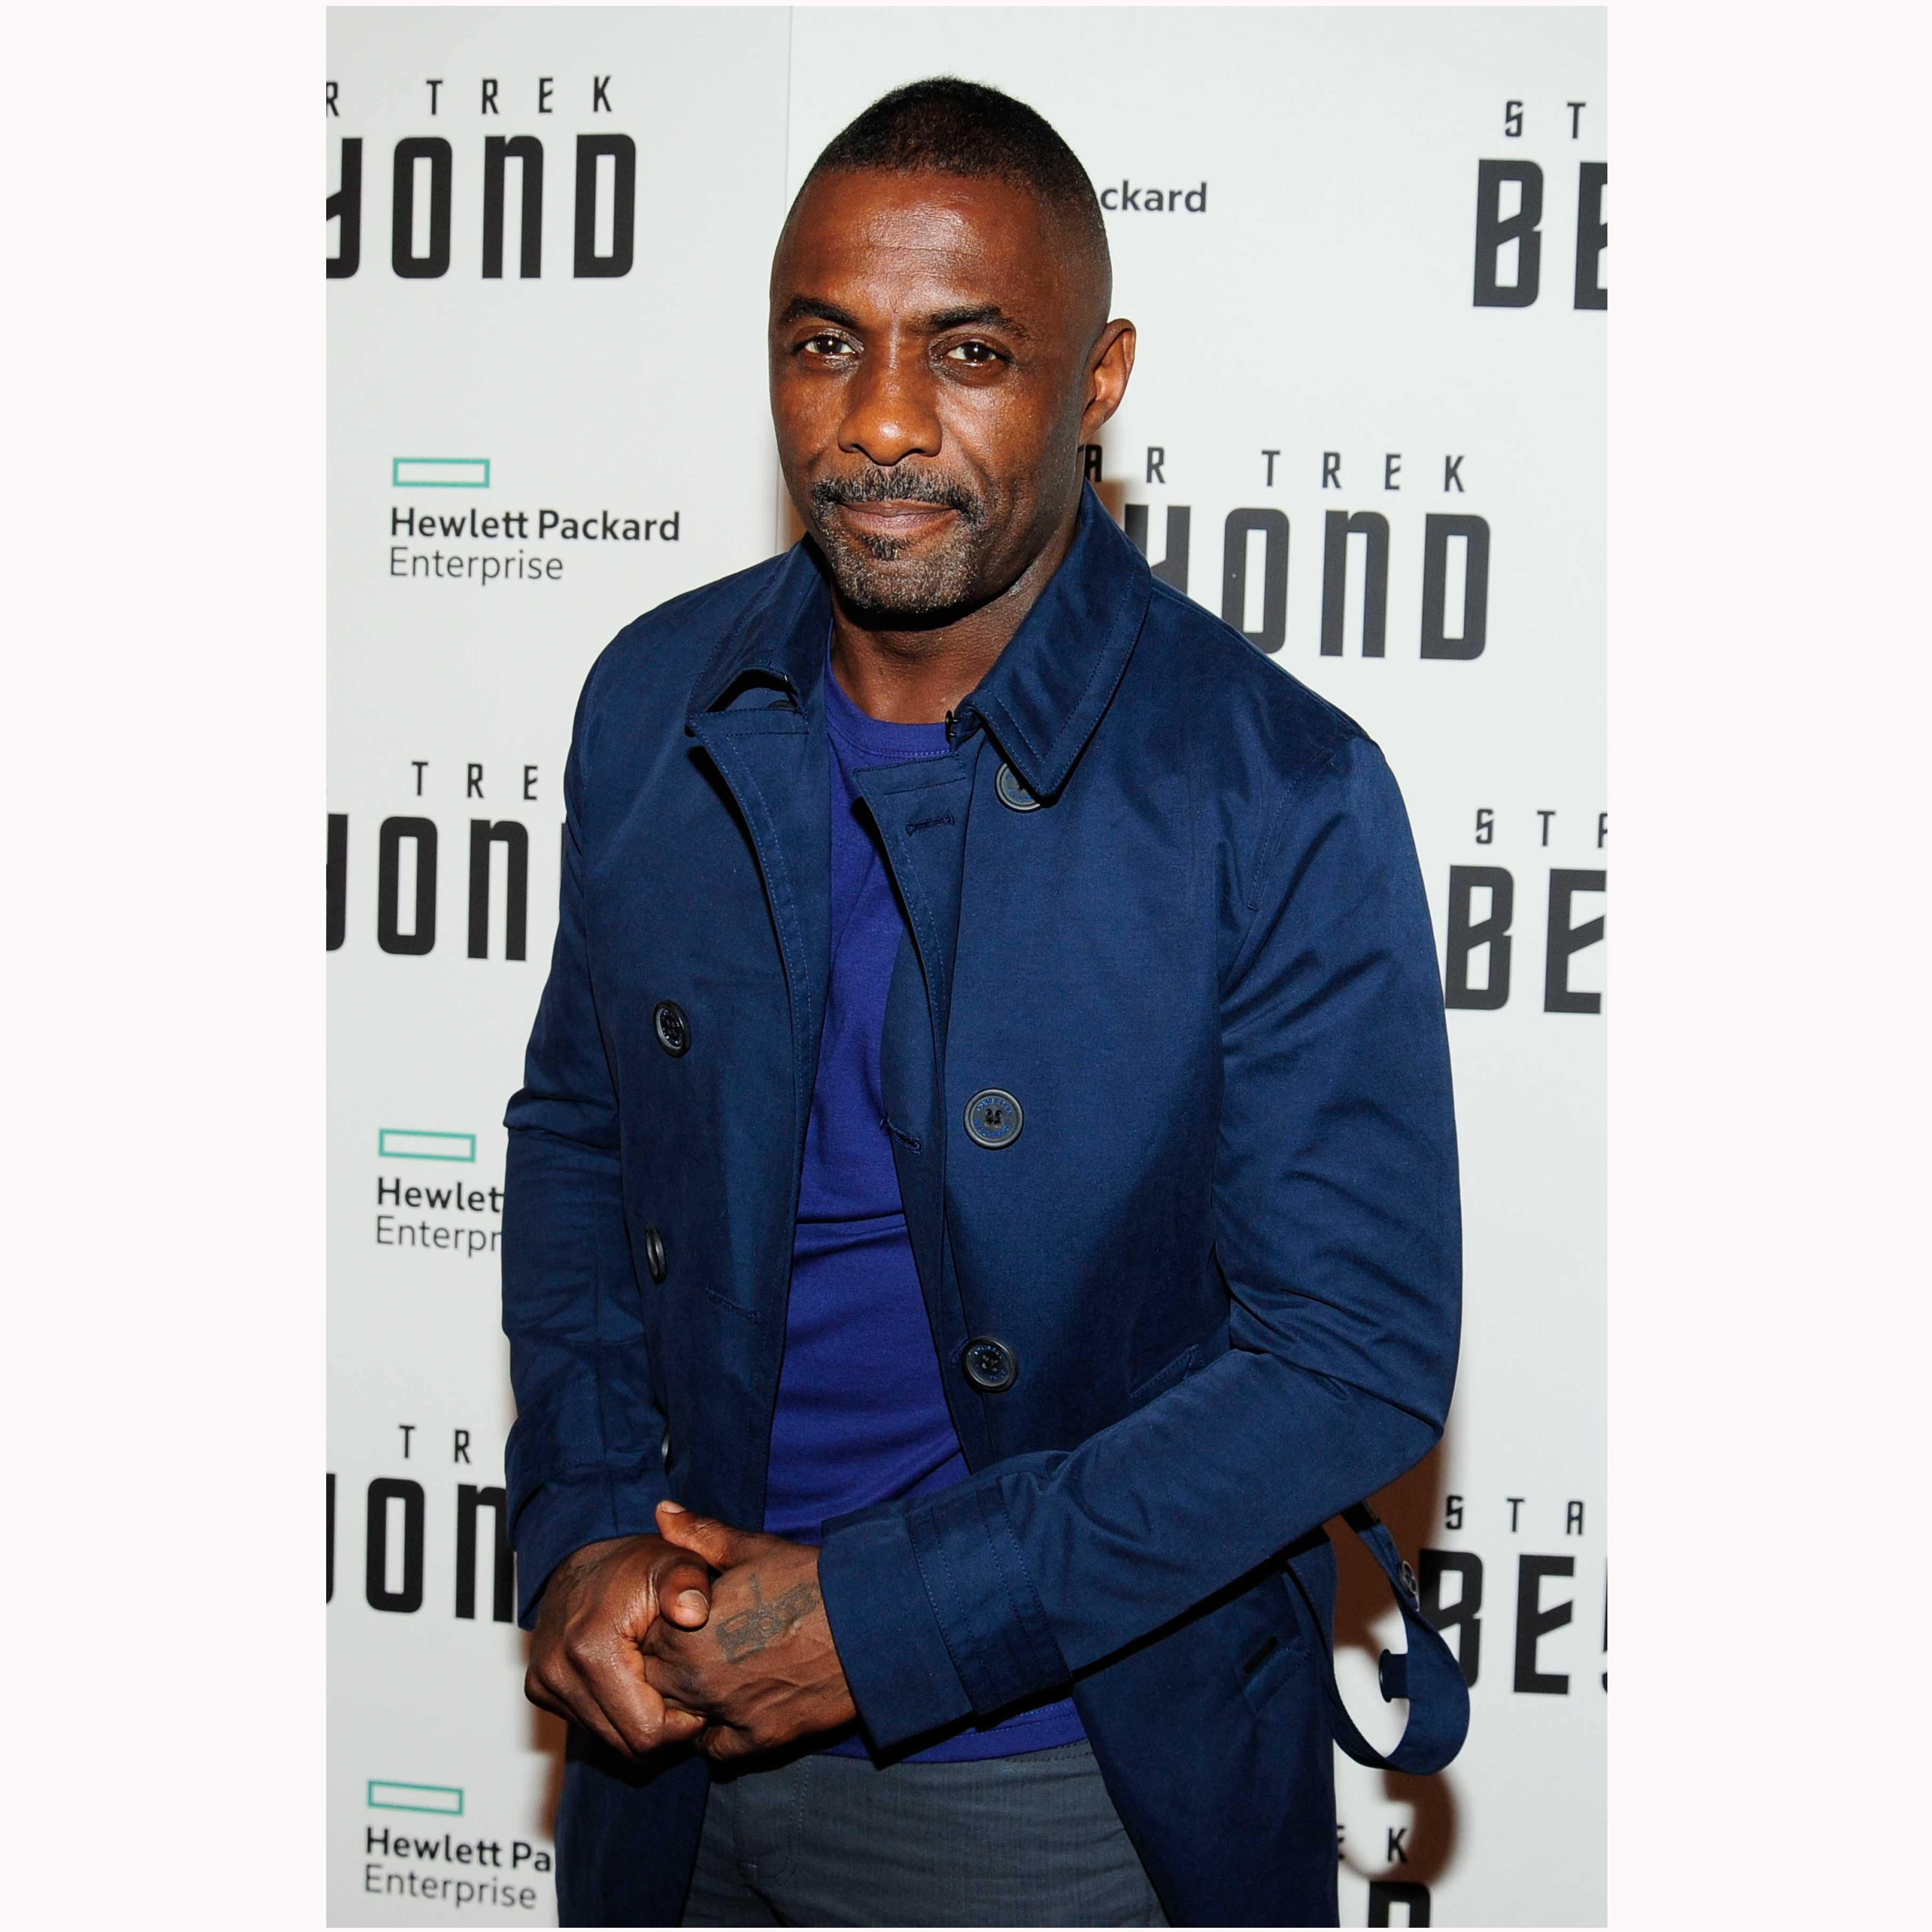 12 Steaming Hot Photos Of Idris Elba Looking Unbelievably Sexy All Over the Globe